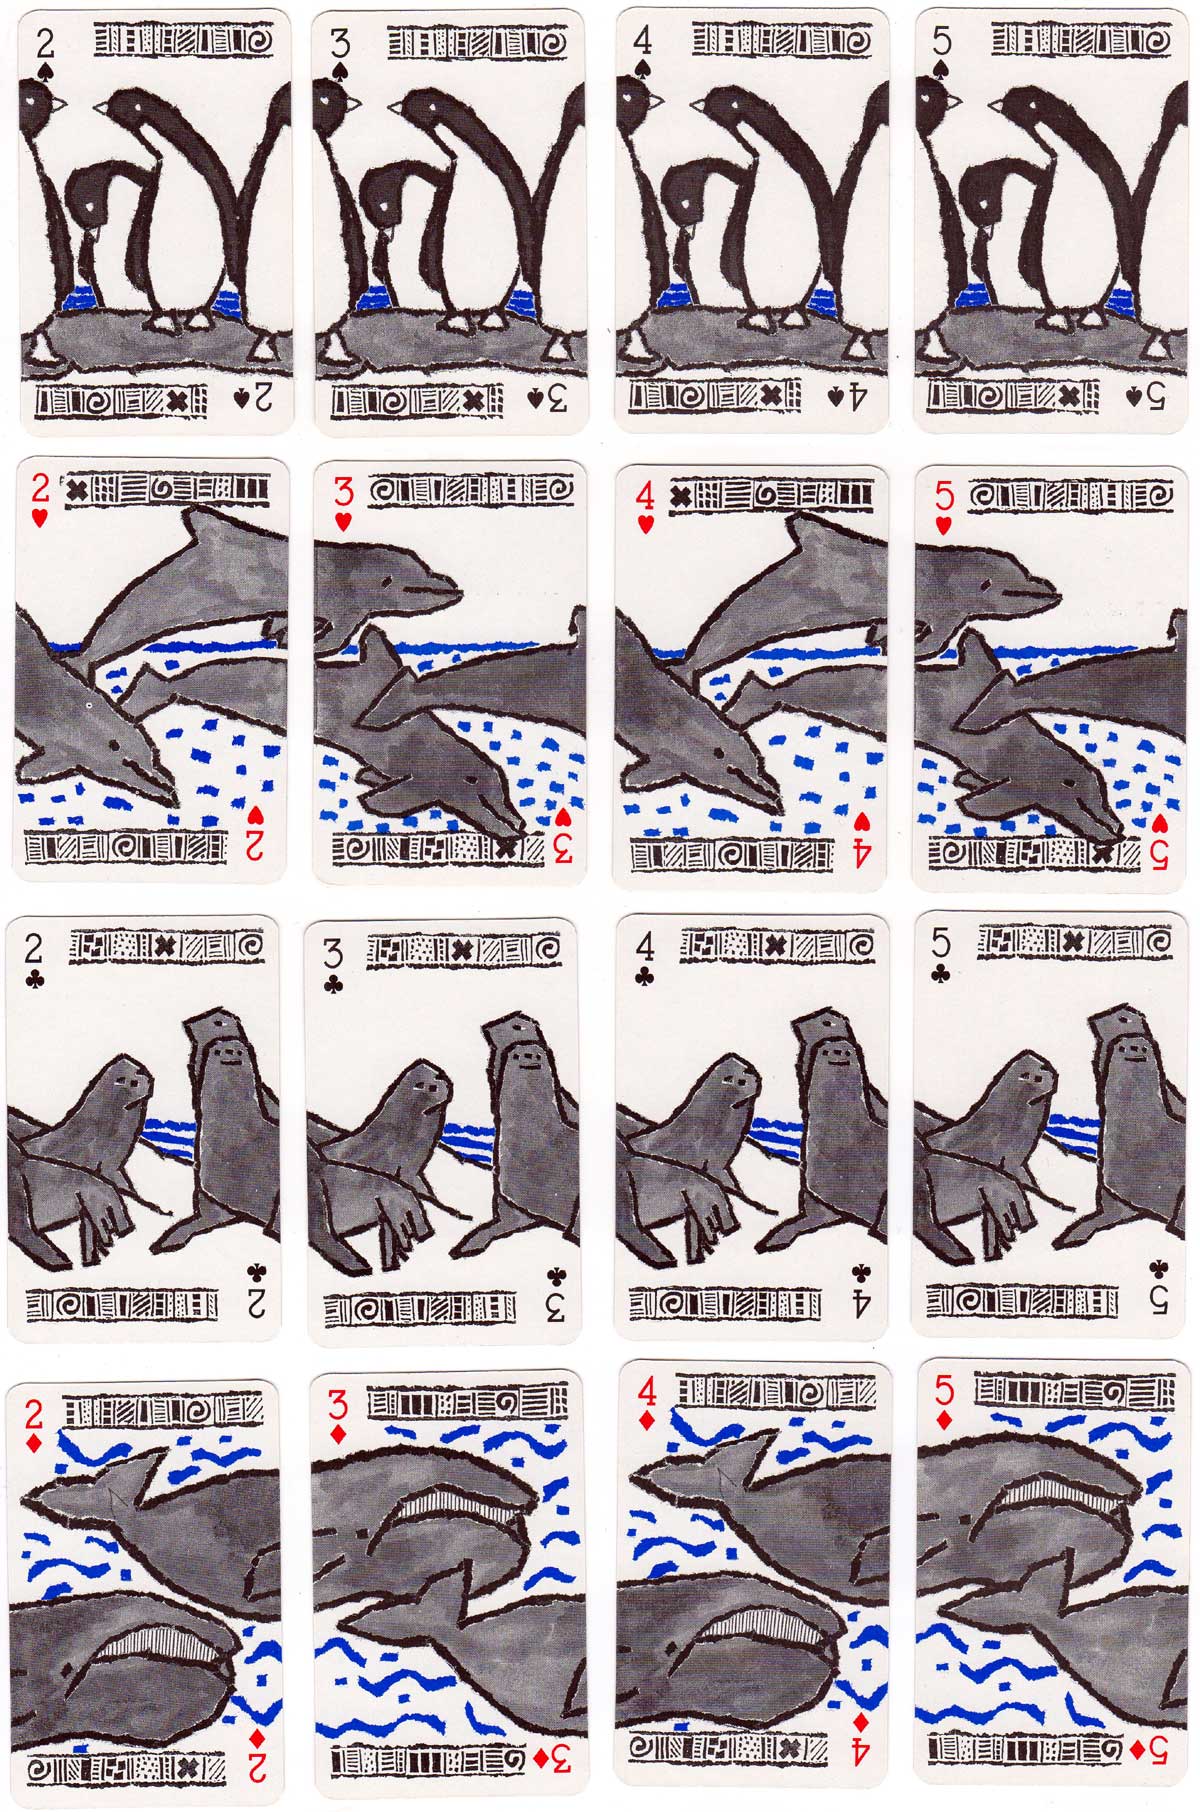 Campaign deck for Greenpeace with naive drawings of penguins, seals, whales and dolphins, c.2018